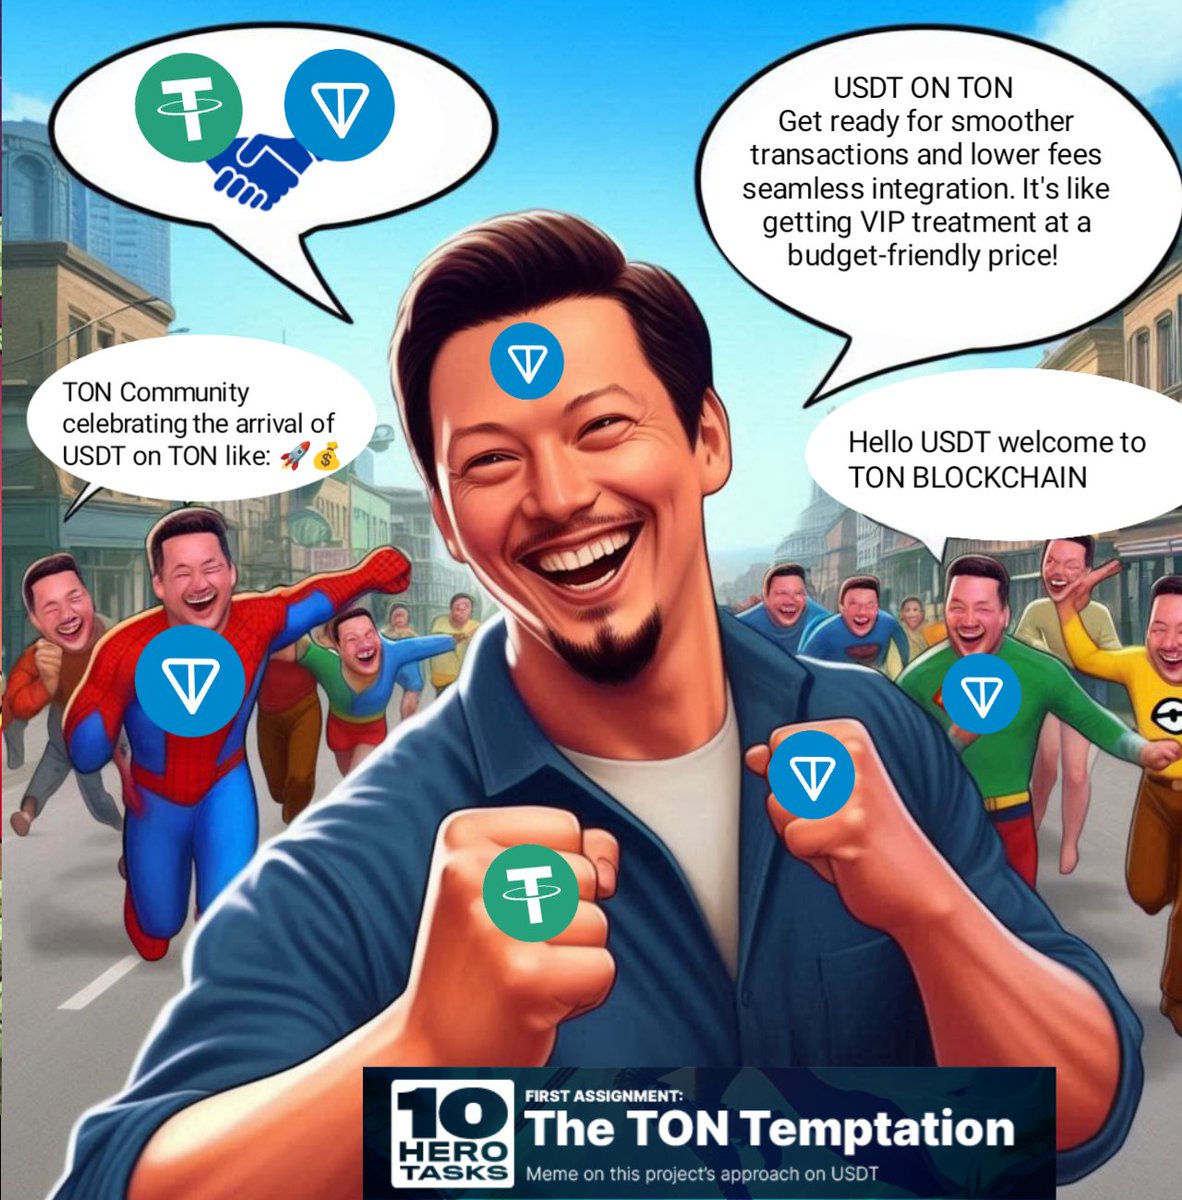 Exciting news! USDt is coming to TON, offering seamless integration and lower fees for peer-to-peer transactions on Telegram.Just remember, USDt on TON is not available to users in certain regions.Stay informed a hind trade responsibly! @ton_blockchain #USDT #TON #TONTemptation